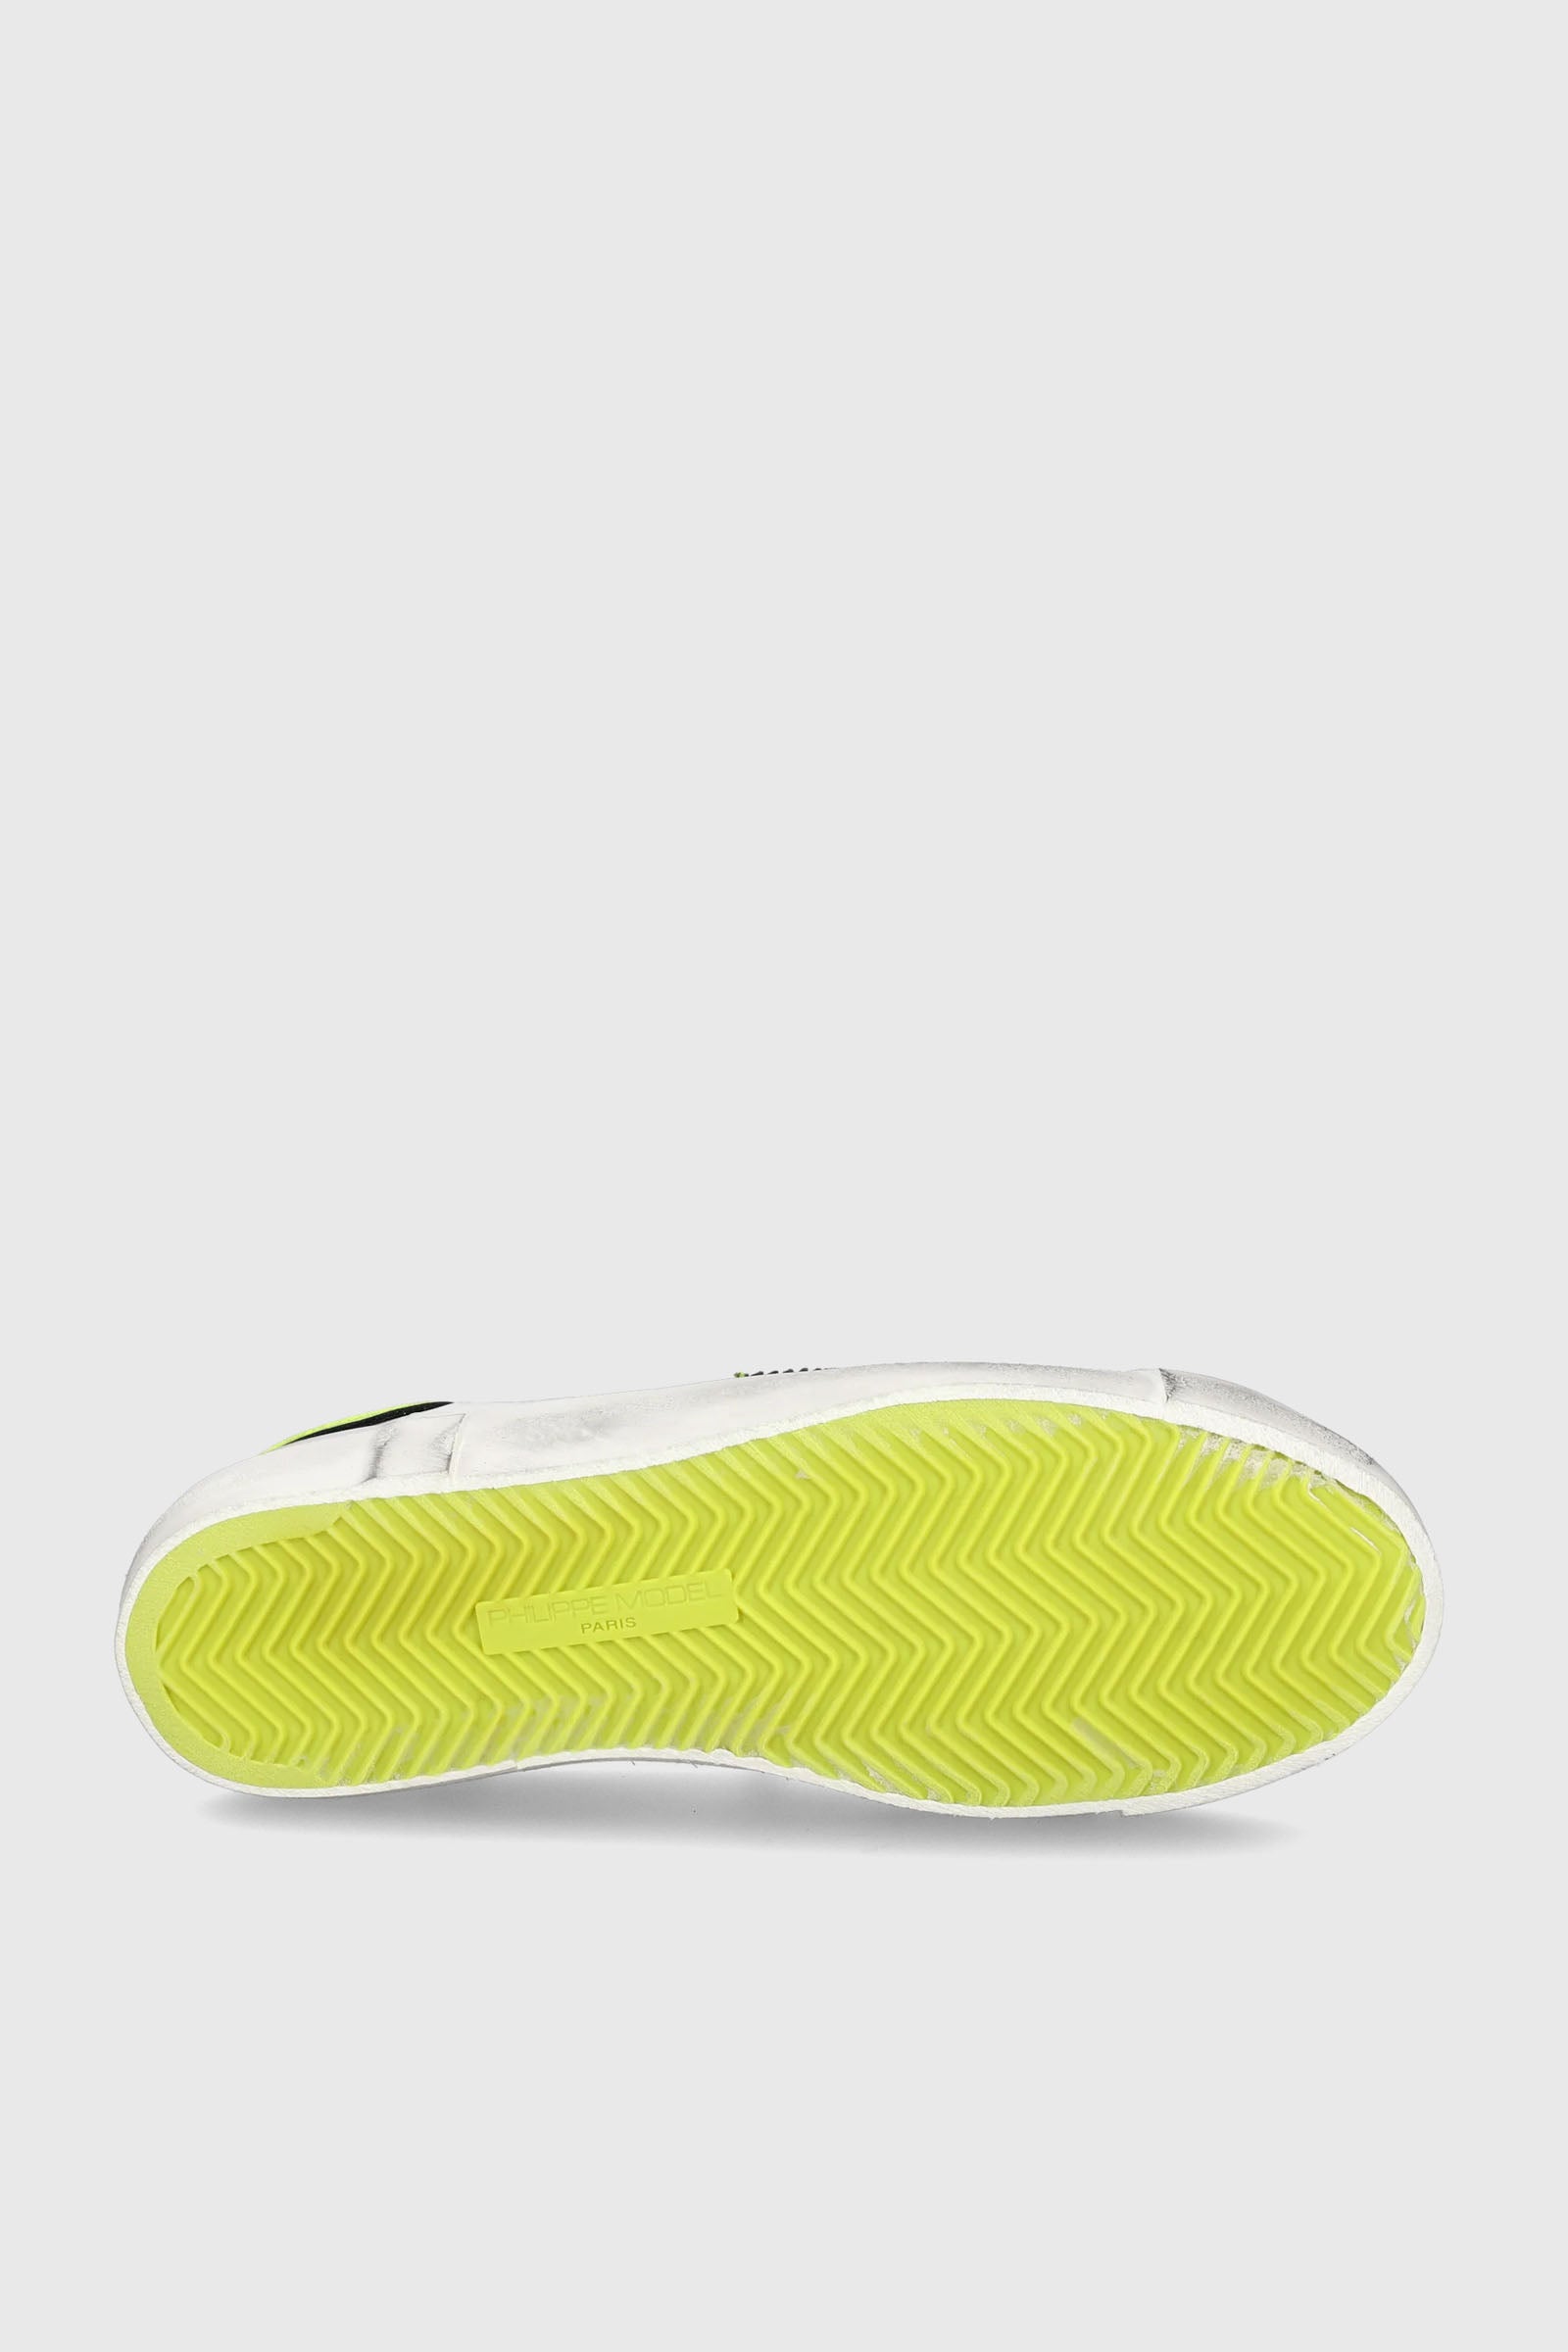 Philippe Model Sneakers PRSX Veau Broderie Pelle Bianco/Giallo Fluo - 6